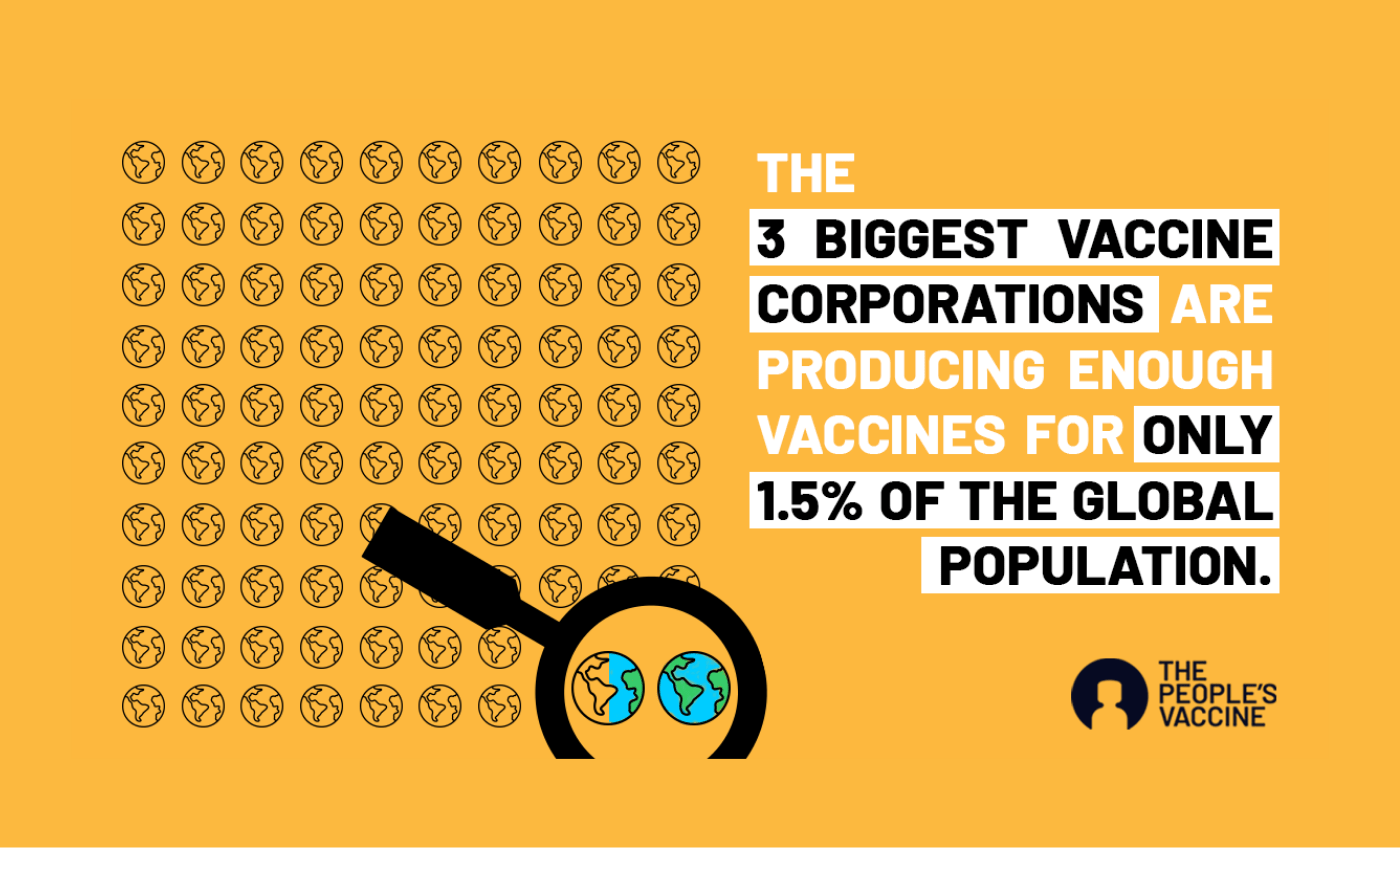 Monopolies causing “artificial rationing” in COVID-19 crisis as 3 biggest global vaccine giants sit on sidelines